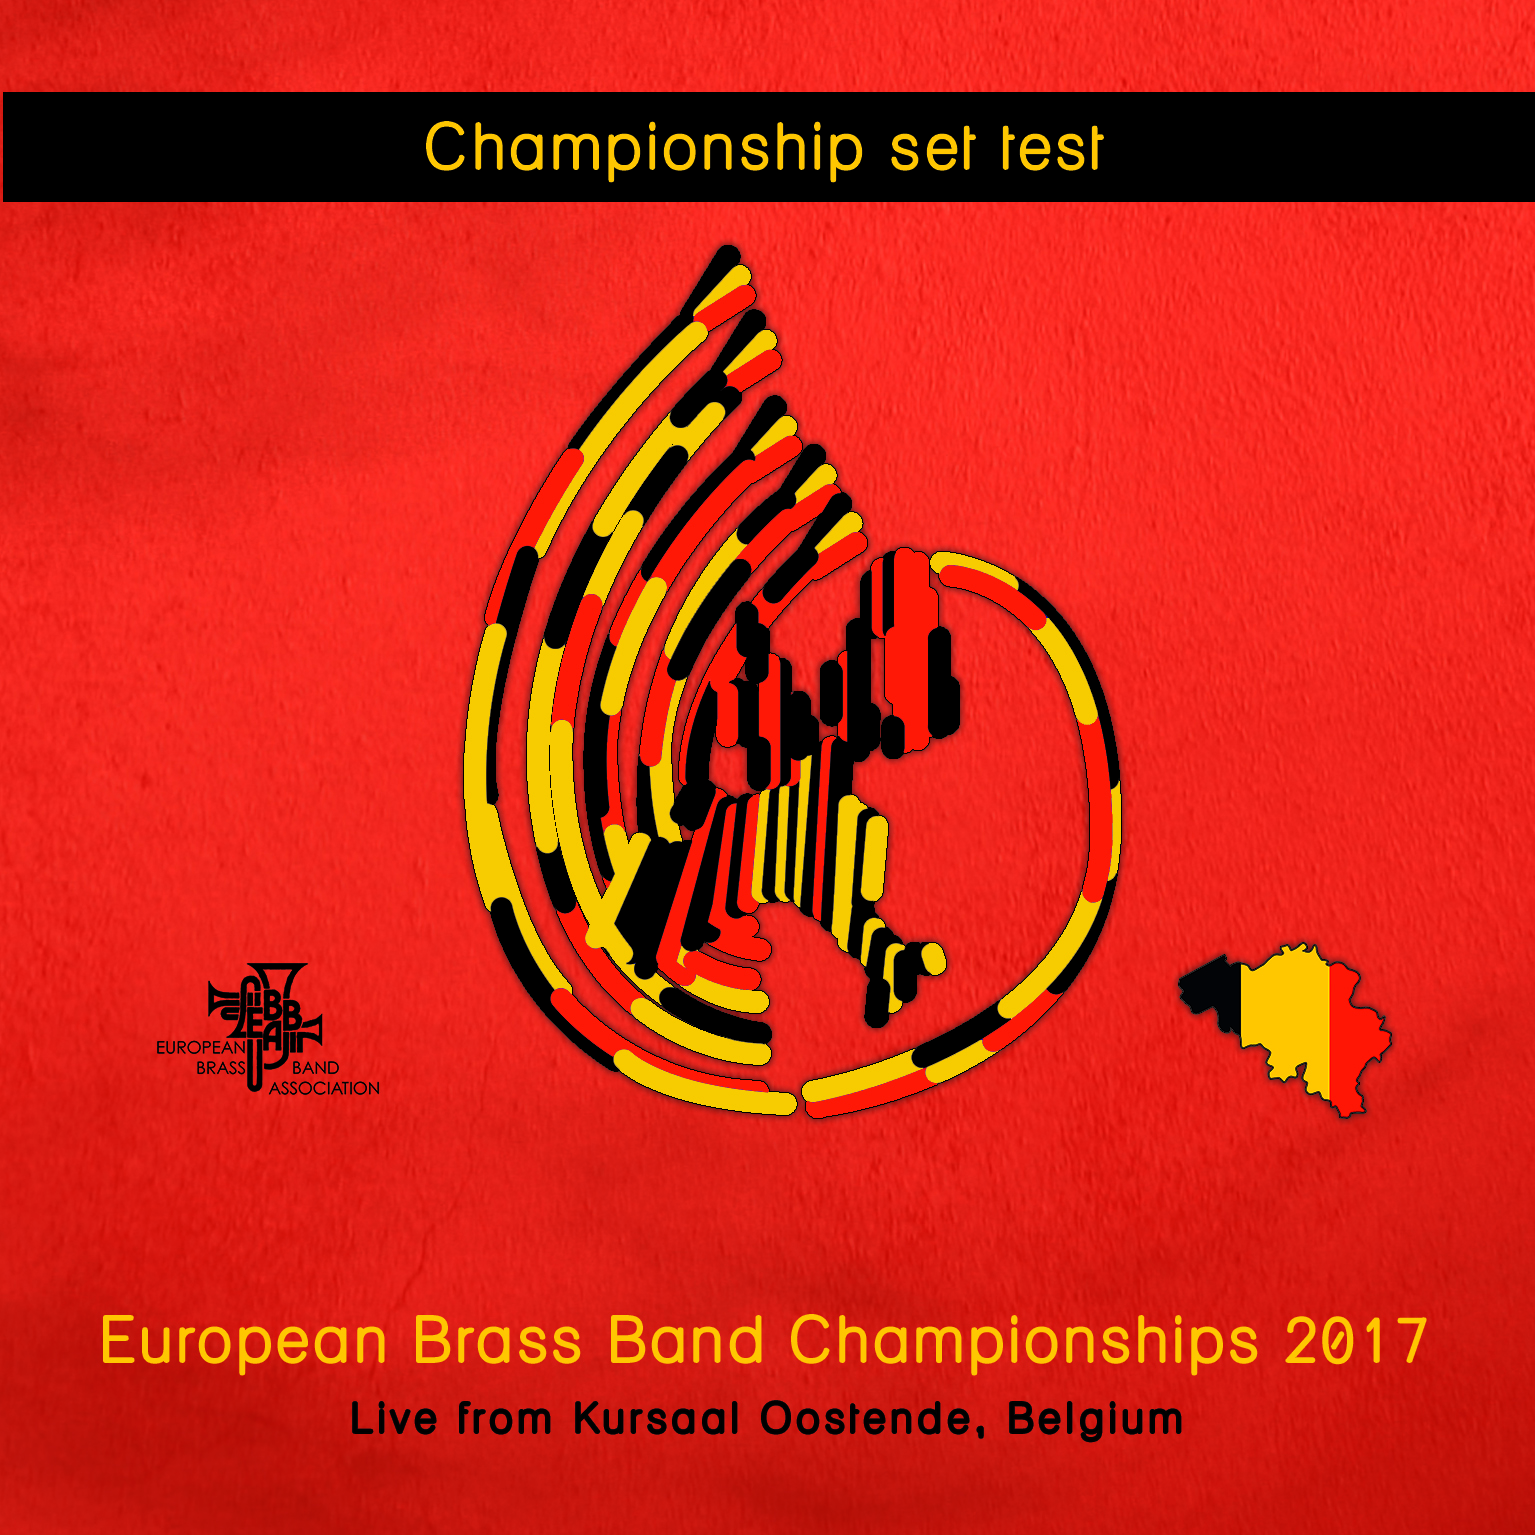 European Brass Band Championships 2017 - Championship Section Set Test - Download